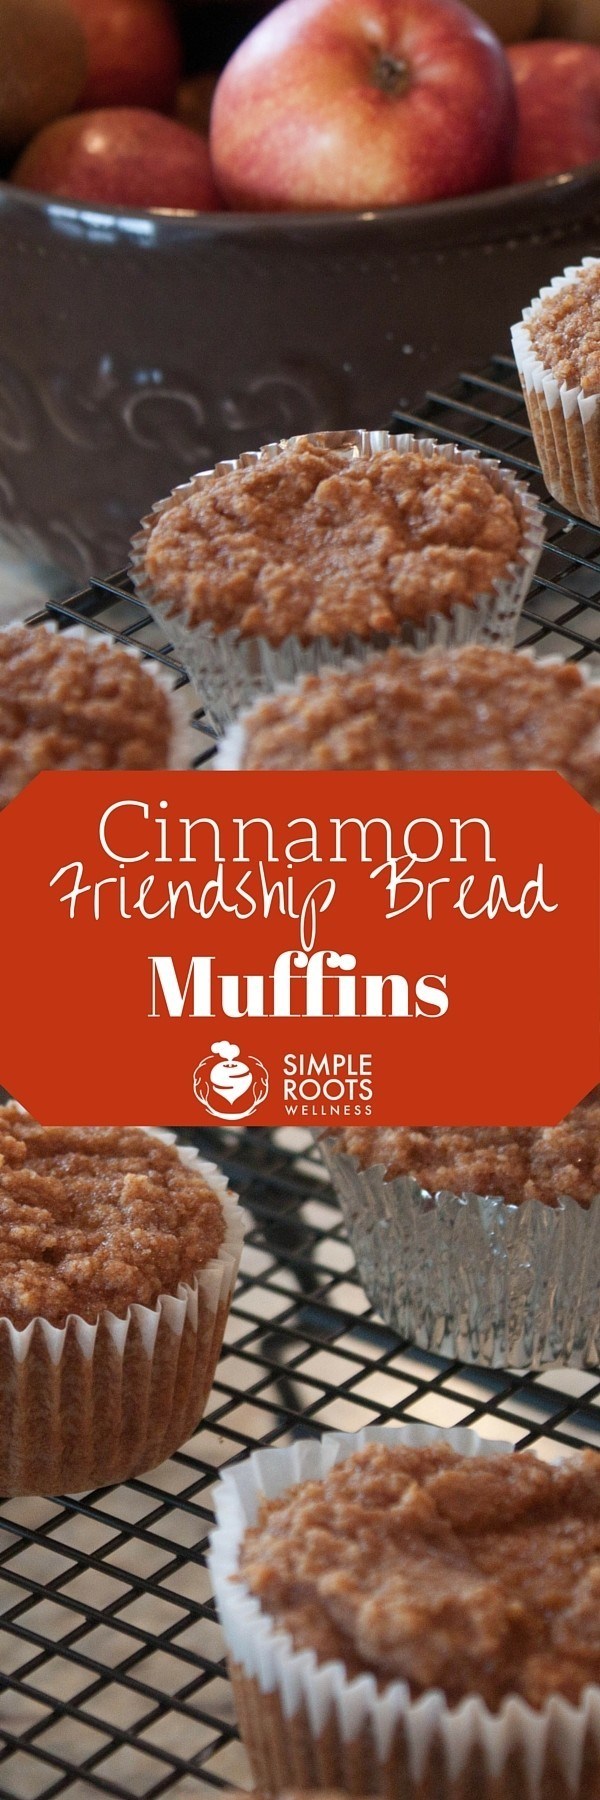 Cinnamon Friendship Bread Muffins are the quickest way to get the taste of amish friendship bread.